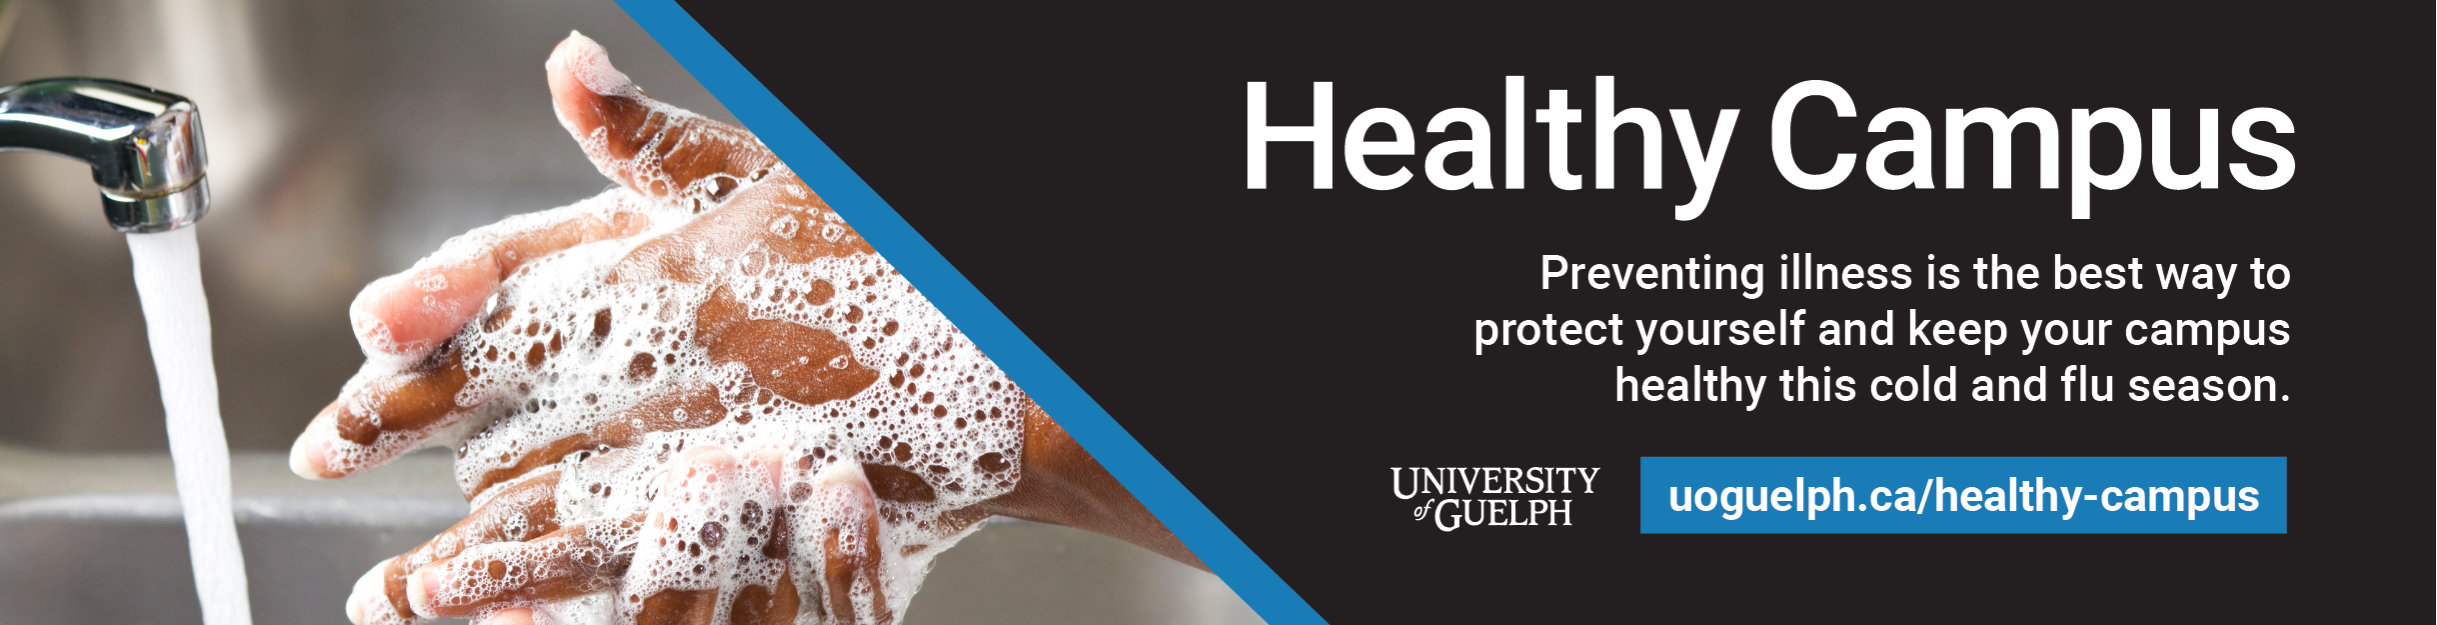 Healthy Campus. Preventing Illness is the best way to protect yourself and keep your campus healthy this cold and flu season. uoguelph.ca/healthy-campus